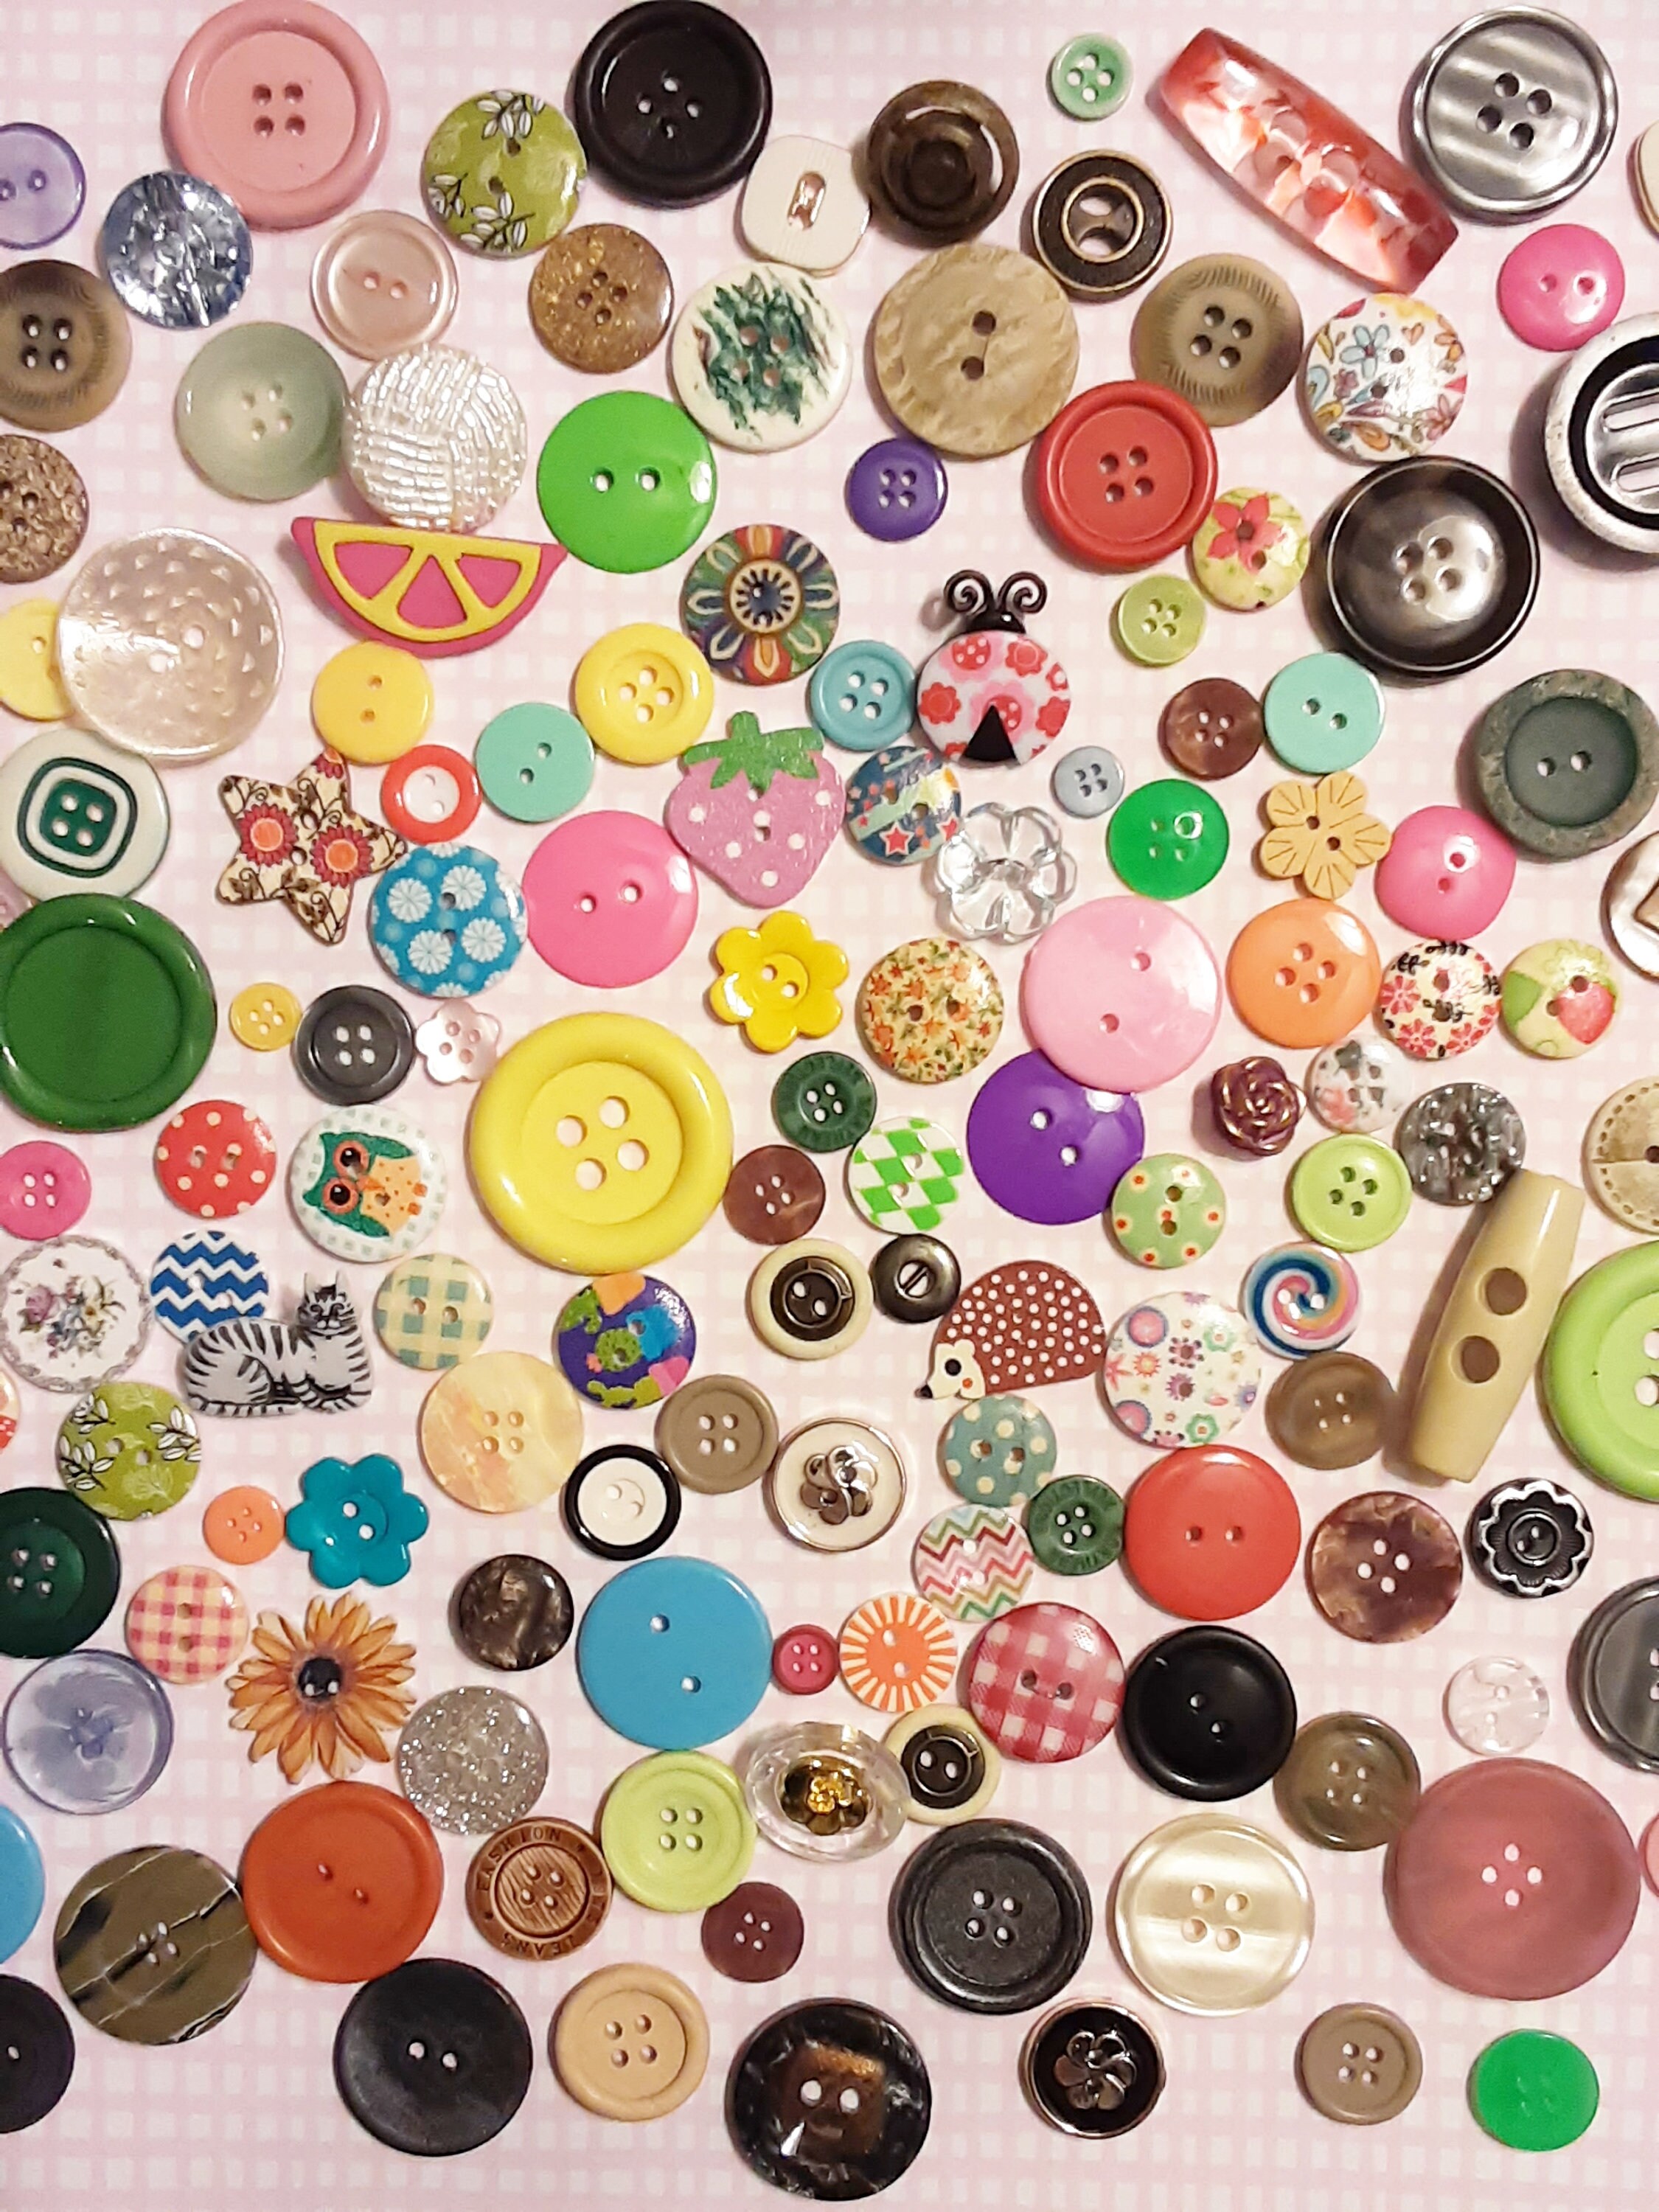 Assorted Mixed Buttons Arts Crafts Card Making Scrapbooking Sewing Round